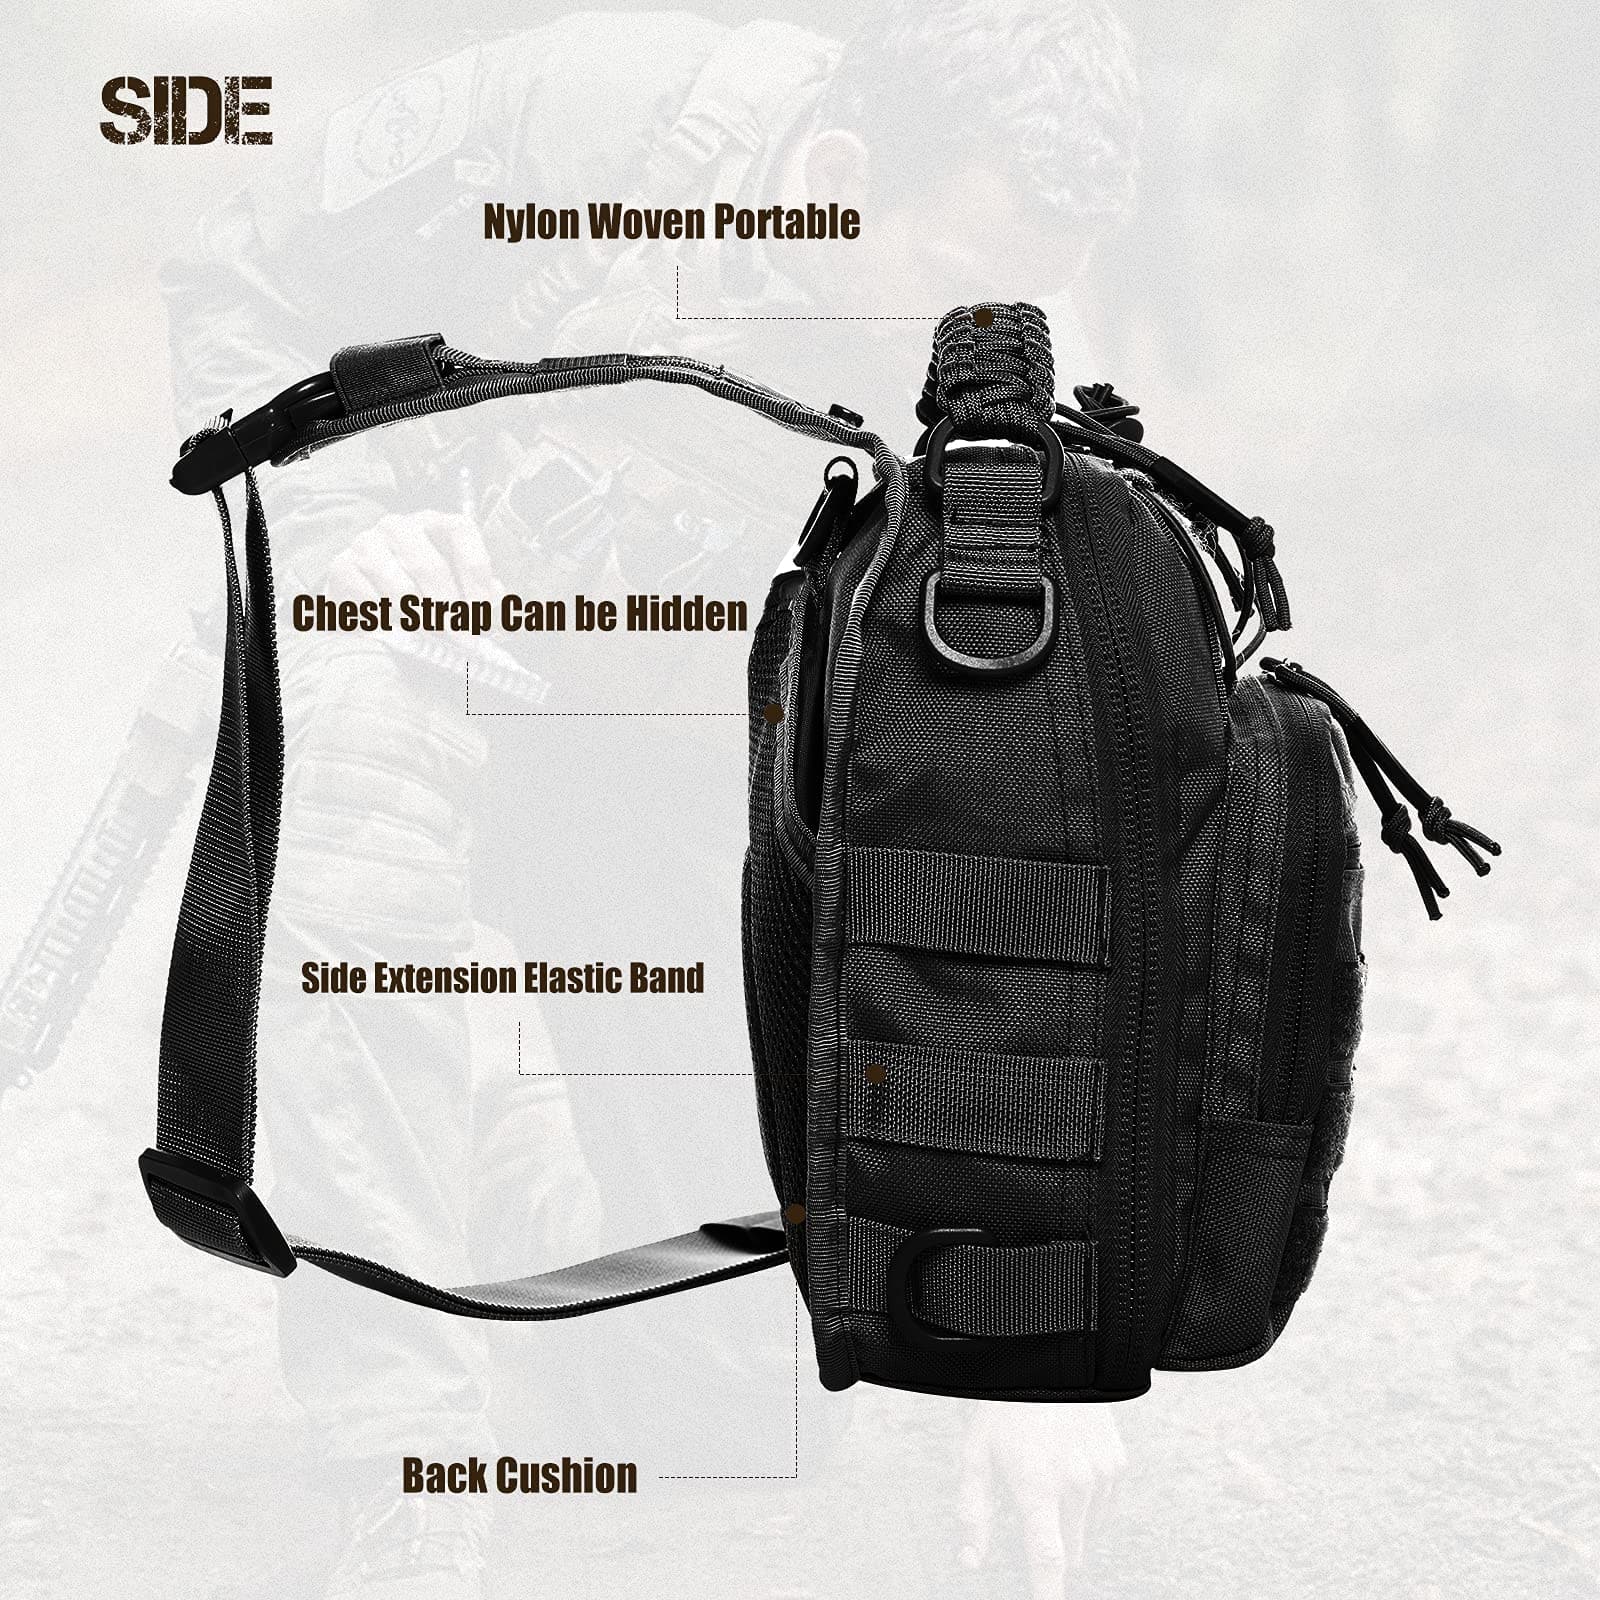 Concealed Carry Tactical Sling Bag For Range And Travel